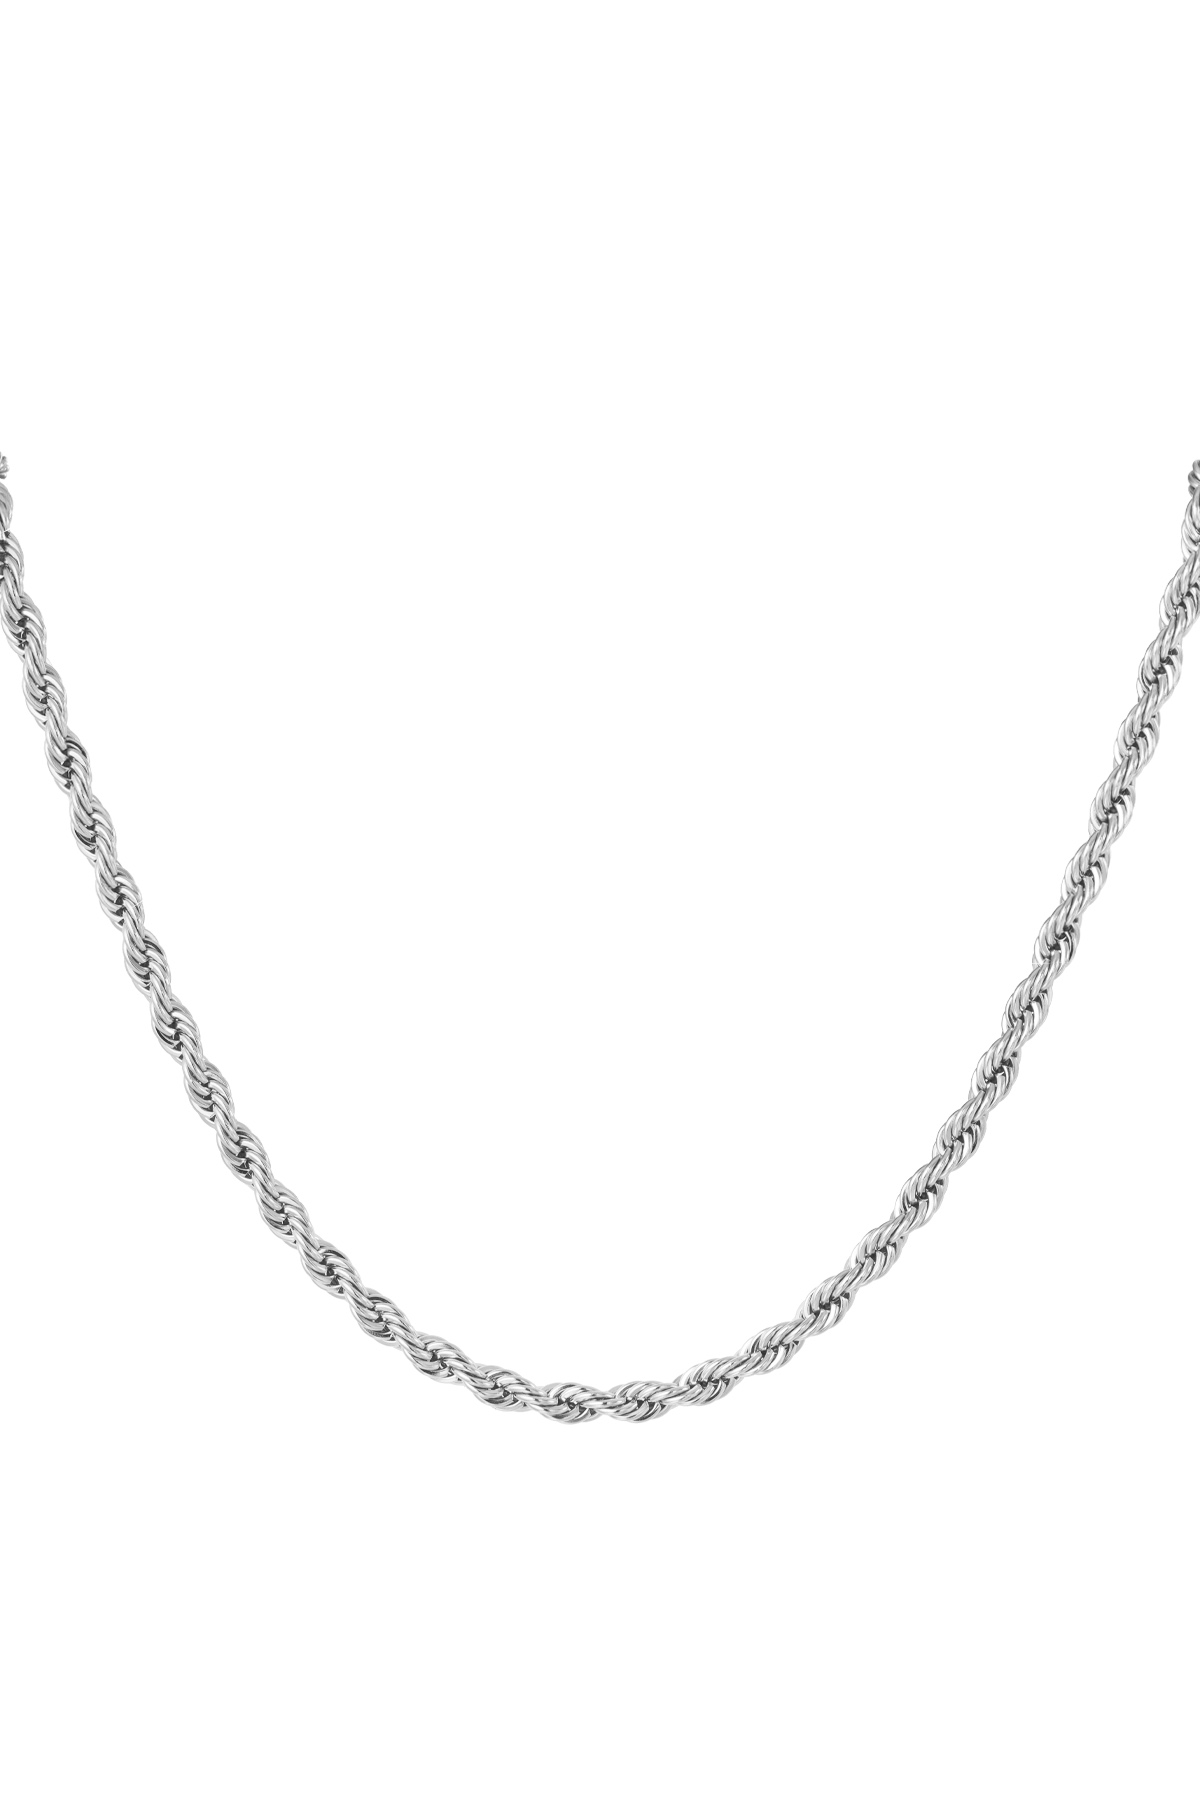 Unisex necklace thick twisted 60cm - silver-4.5MM